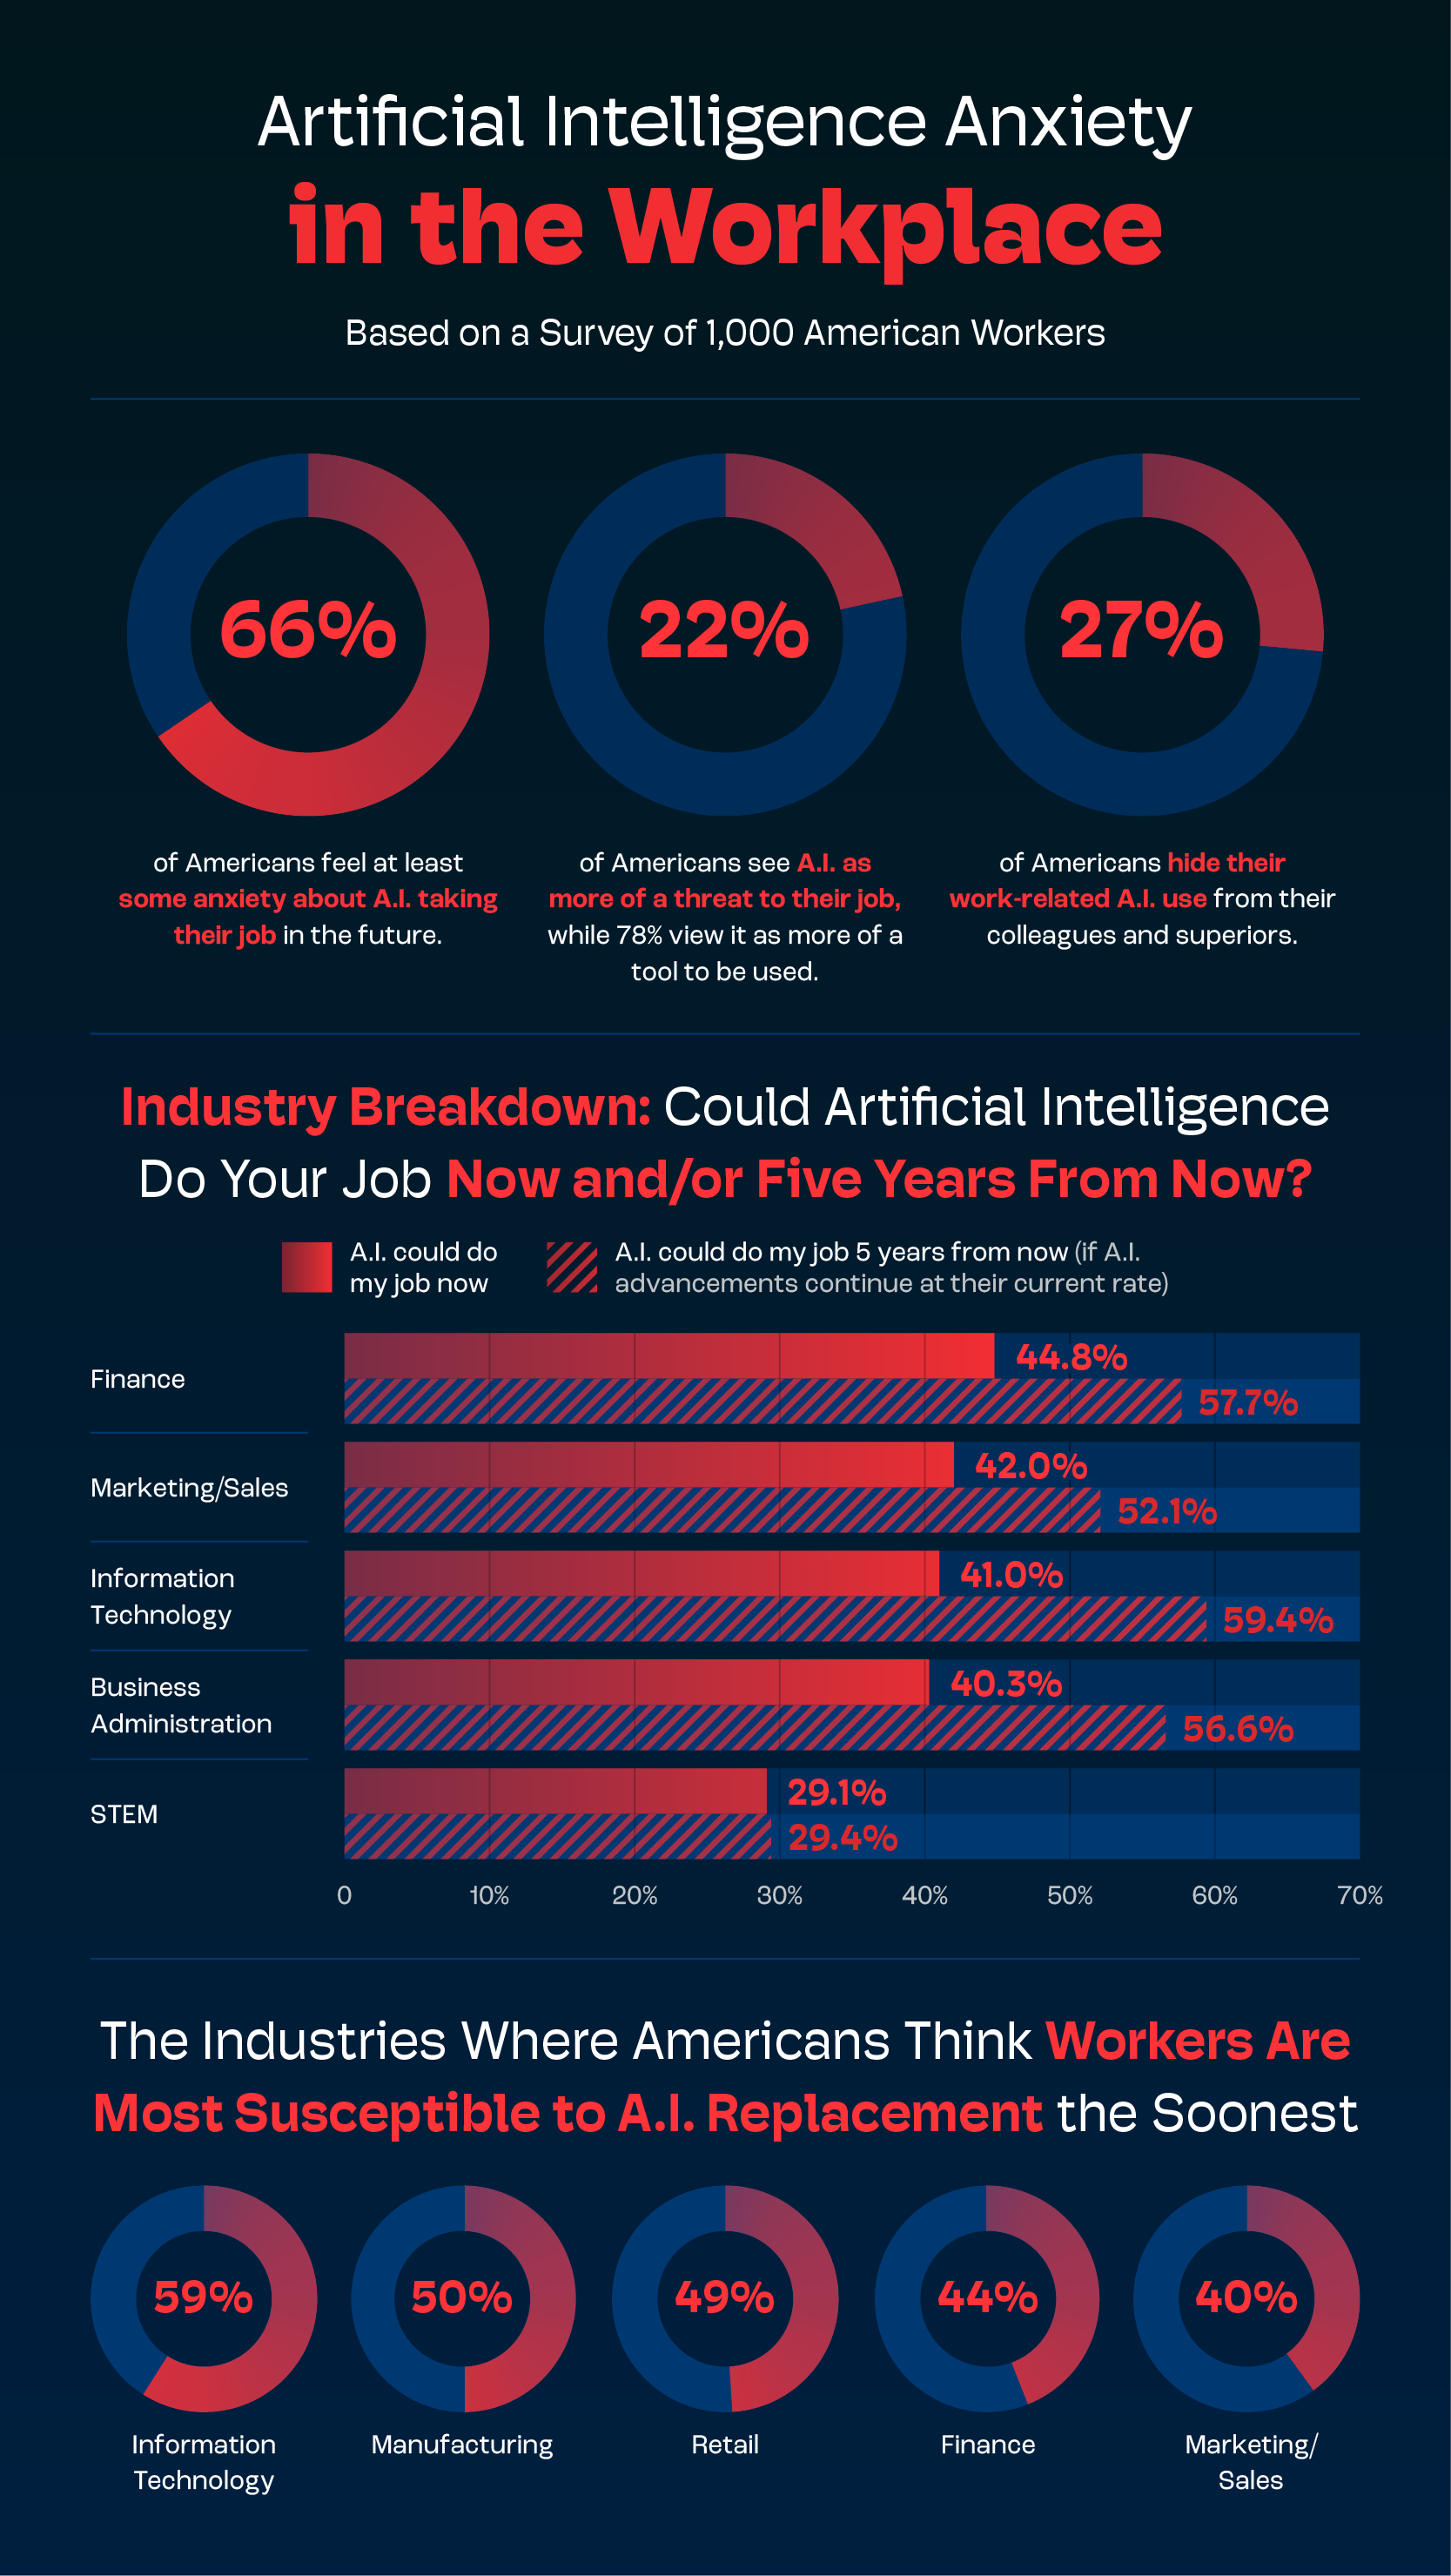 An infographic showing results from a survey about artificial intelligence use at work.